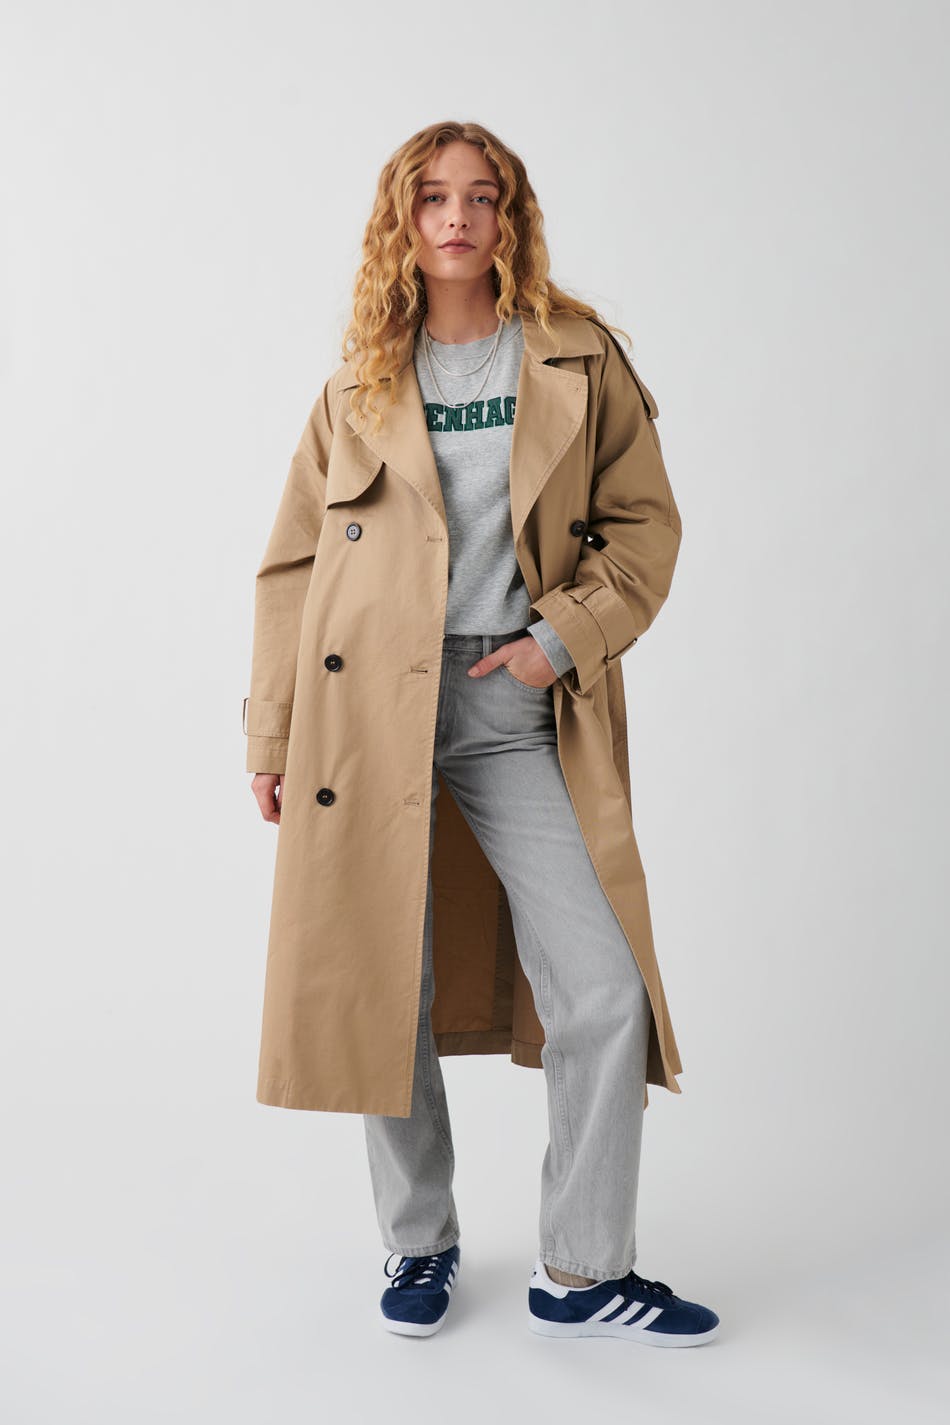 Gina Tricot - Maxi trench coat - trenchcoats - Beige - M - Female